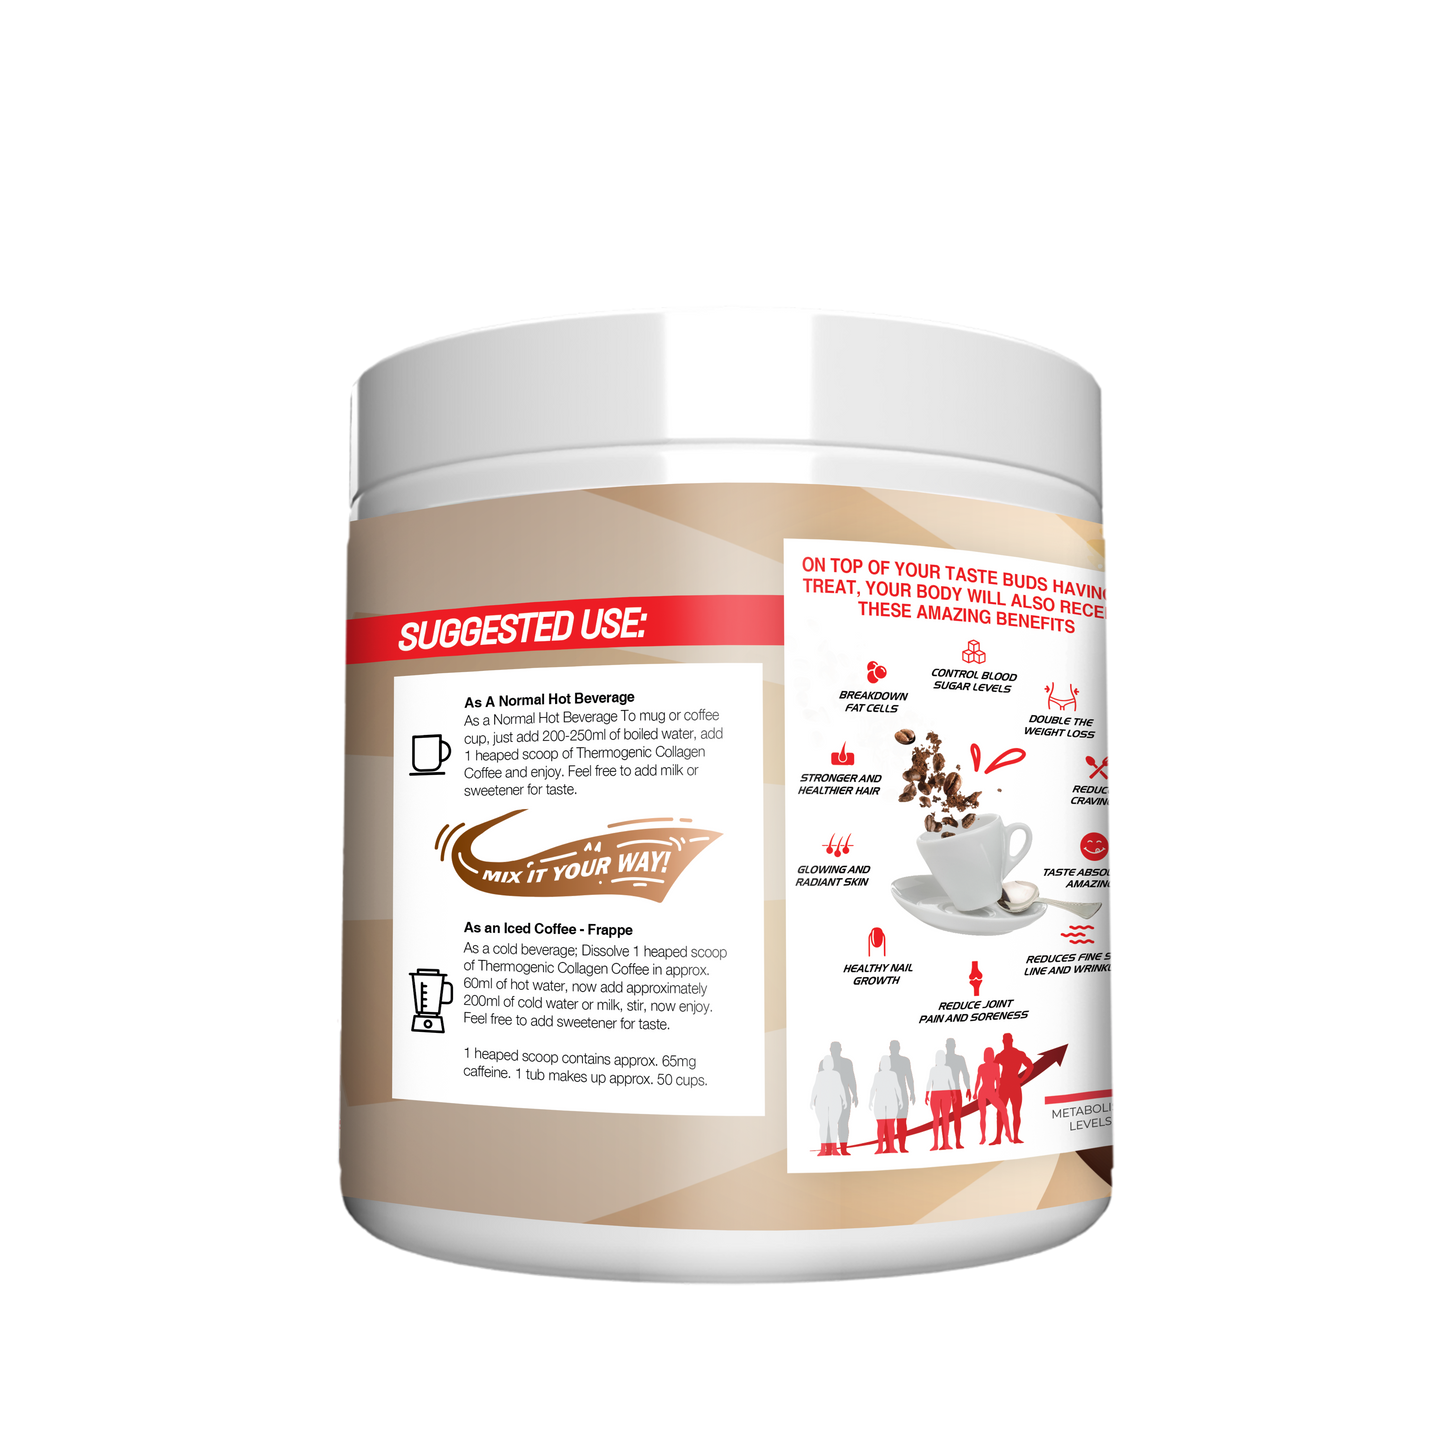 THERMOGENIC COLLAGEN COFFEE